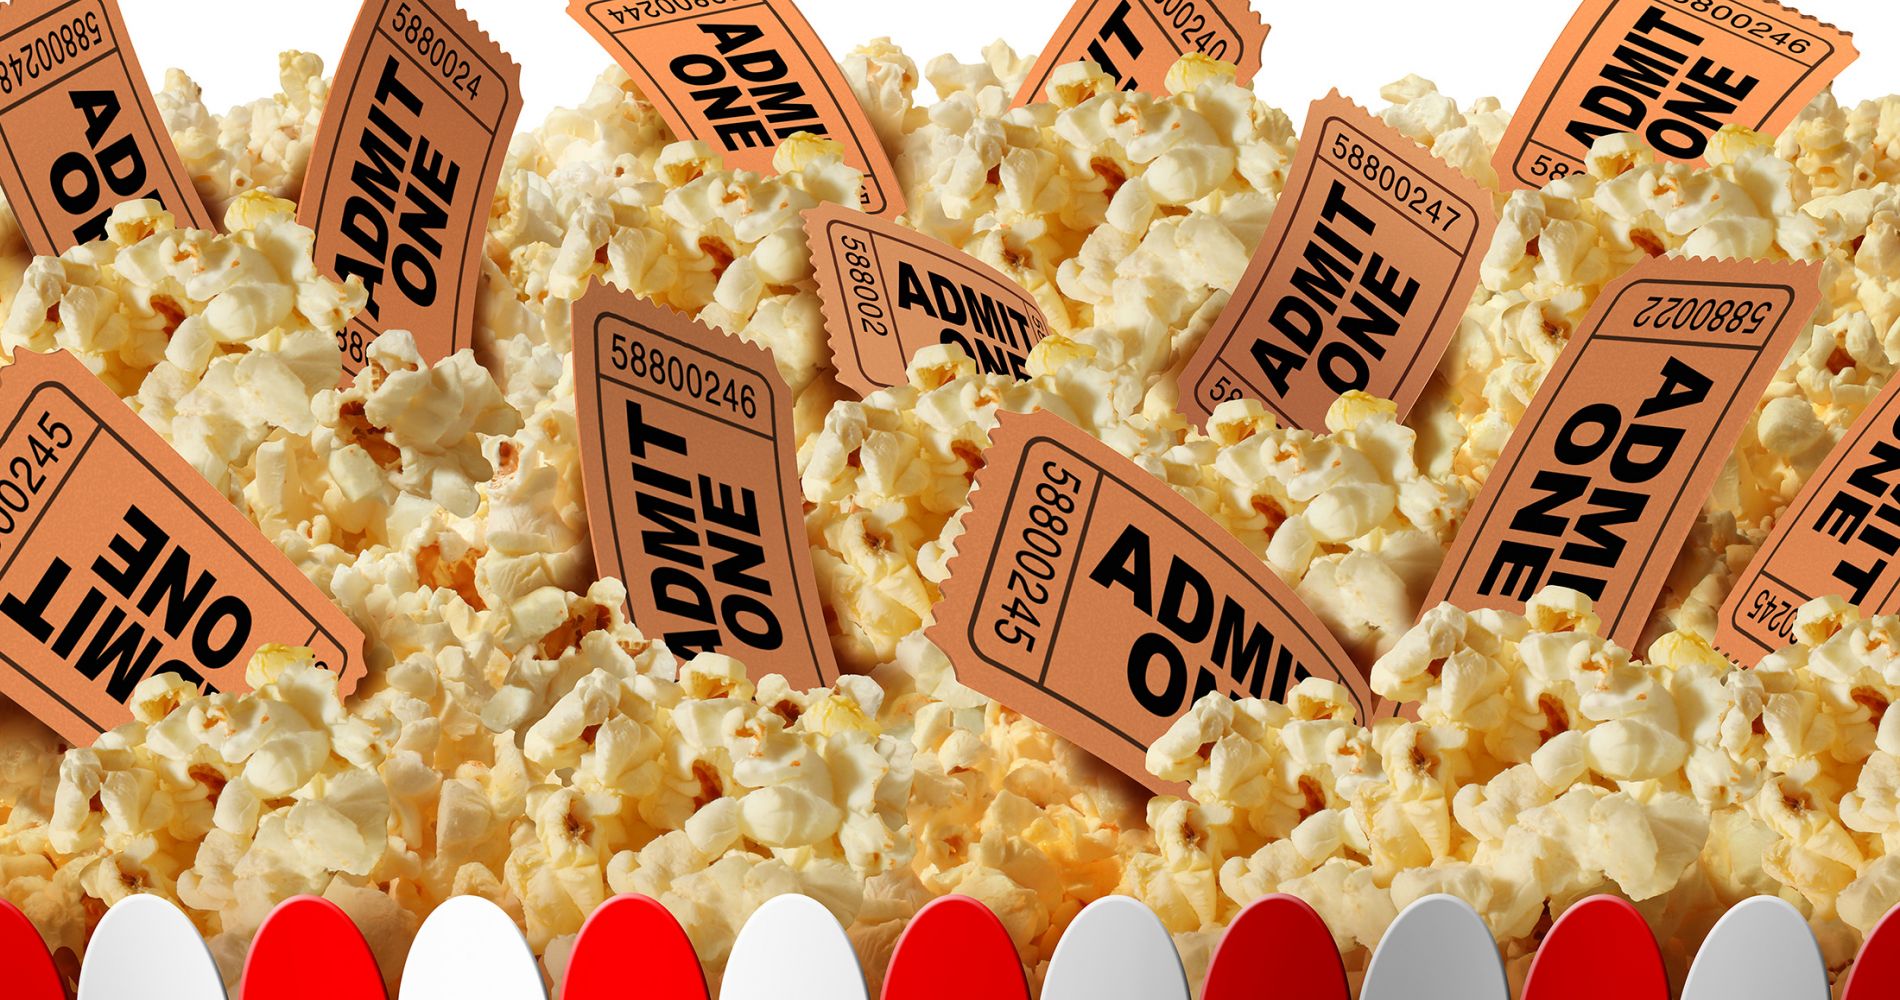 A red and white box holds popcorn, with paper movie stub tickets poking out from the popcorn.